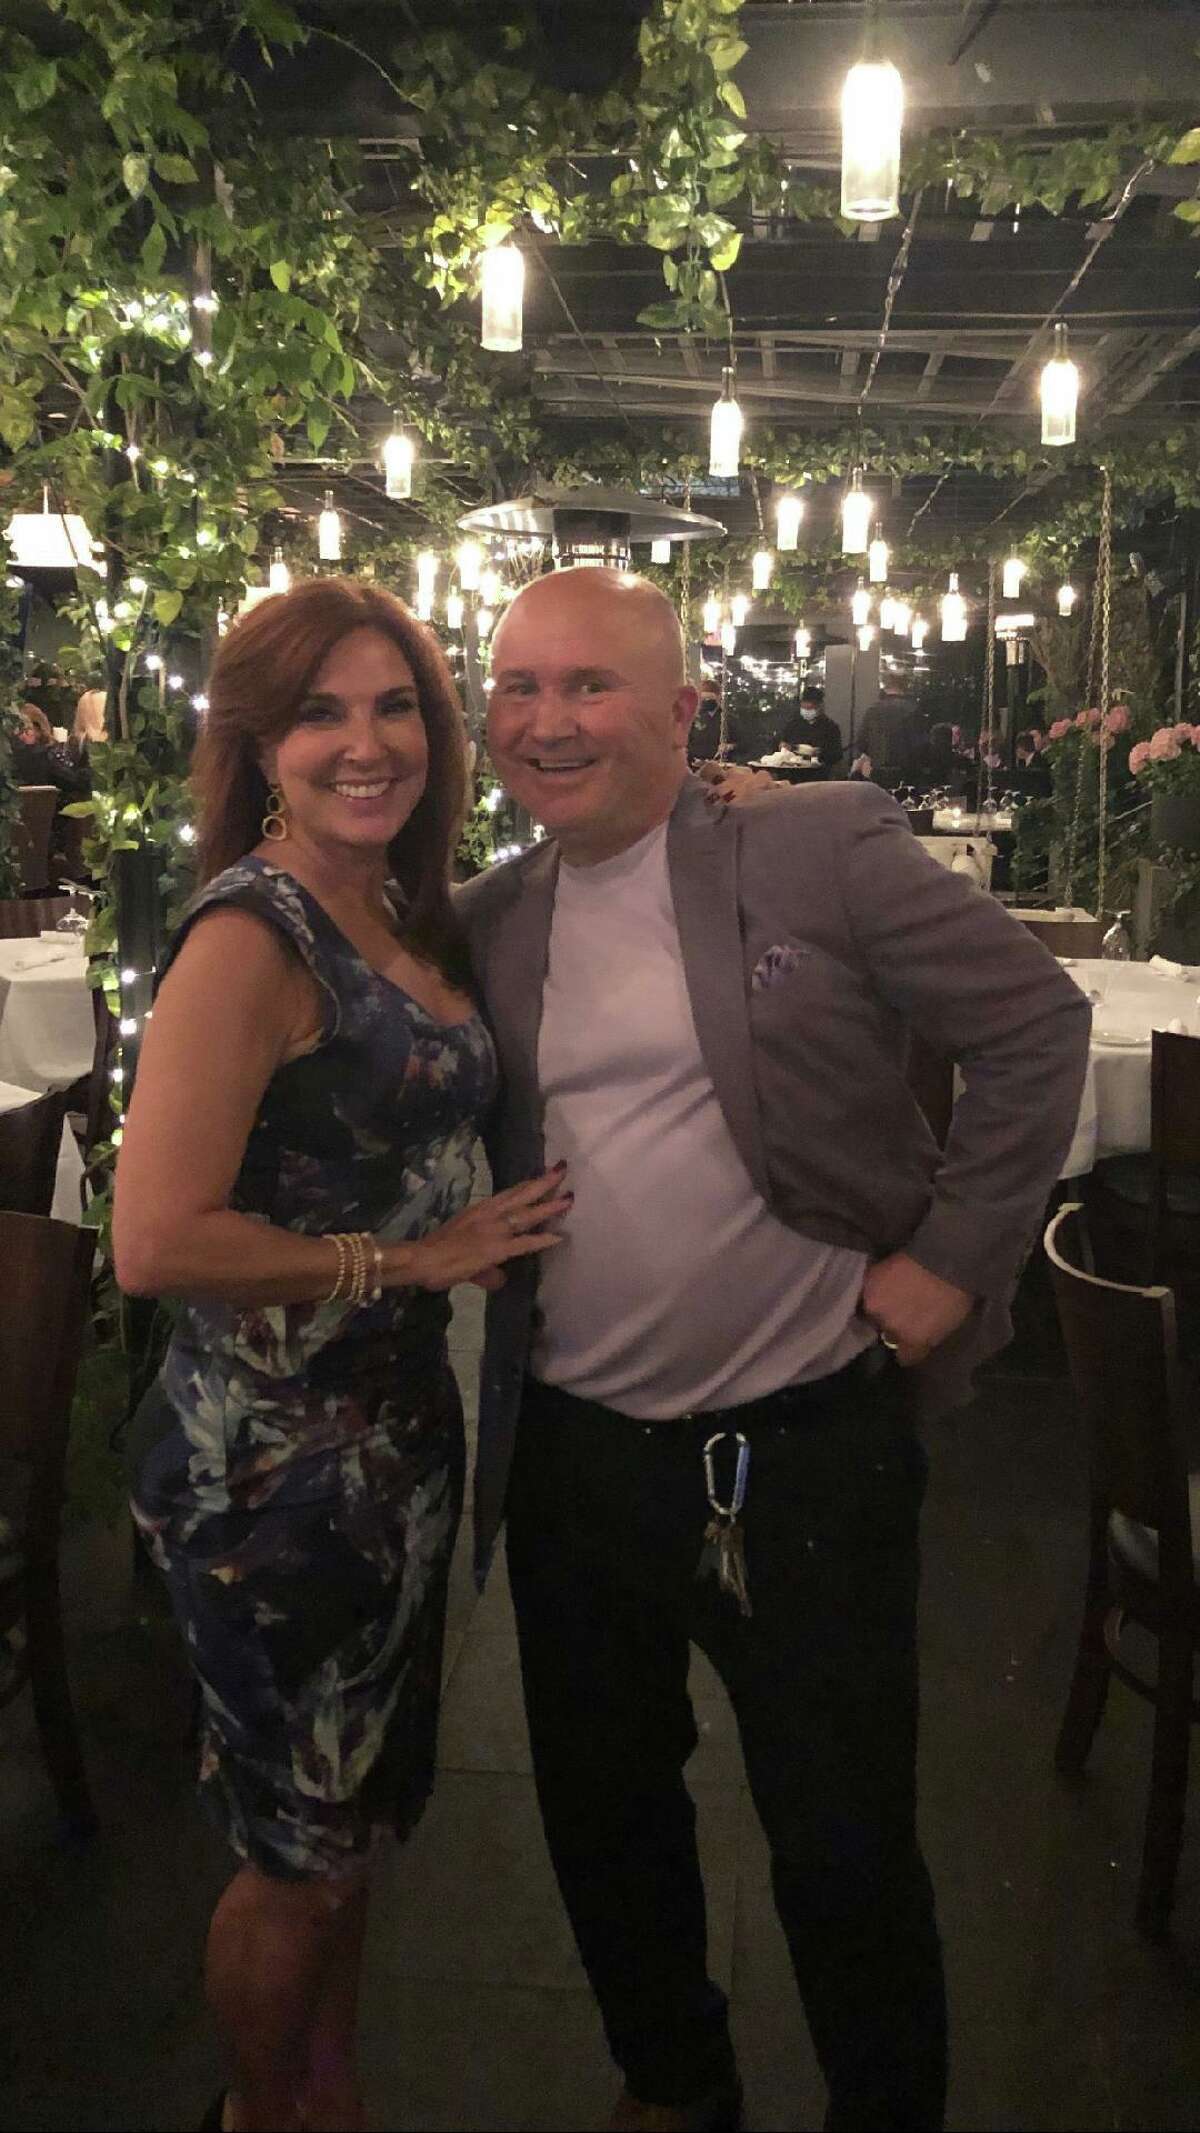 TV Judge Marilyn Milian of ‘The People’s Court’ with Tony Capasso at Tony's at the JHouse in Riverside recently. Daytime Emmy Award-winning judge Marilyn Milian was seen having dinner at Tony’s at the JHouse in Riverside. Milian presides over the American courtroom television series “The People’s Court” on WTIC Fox 61. Read more.